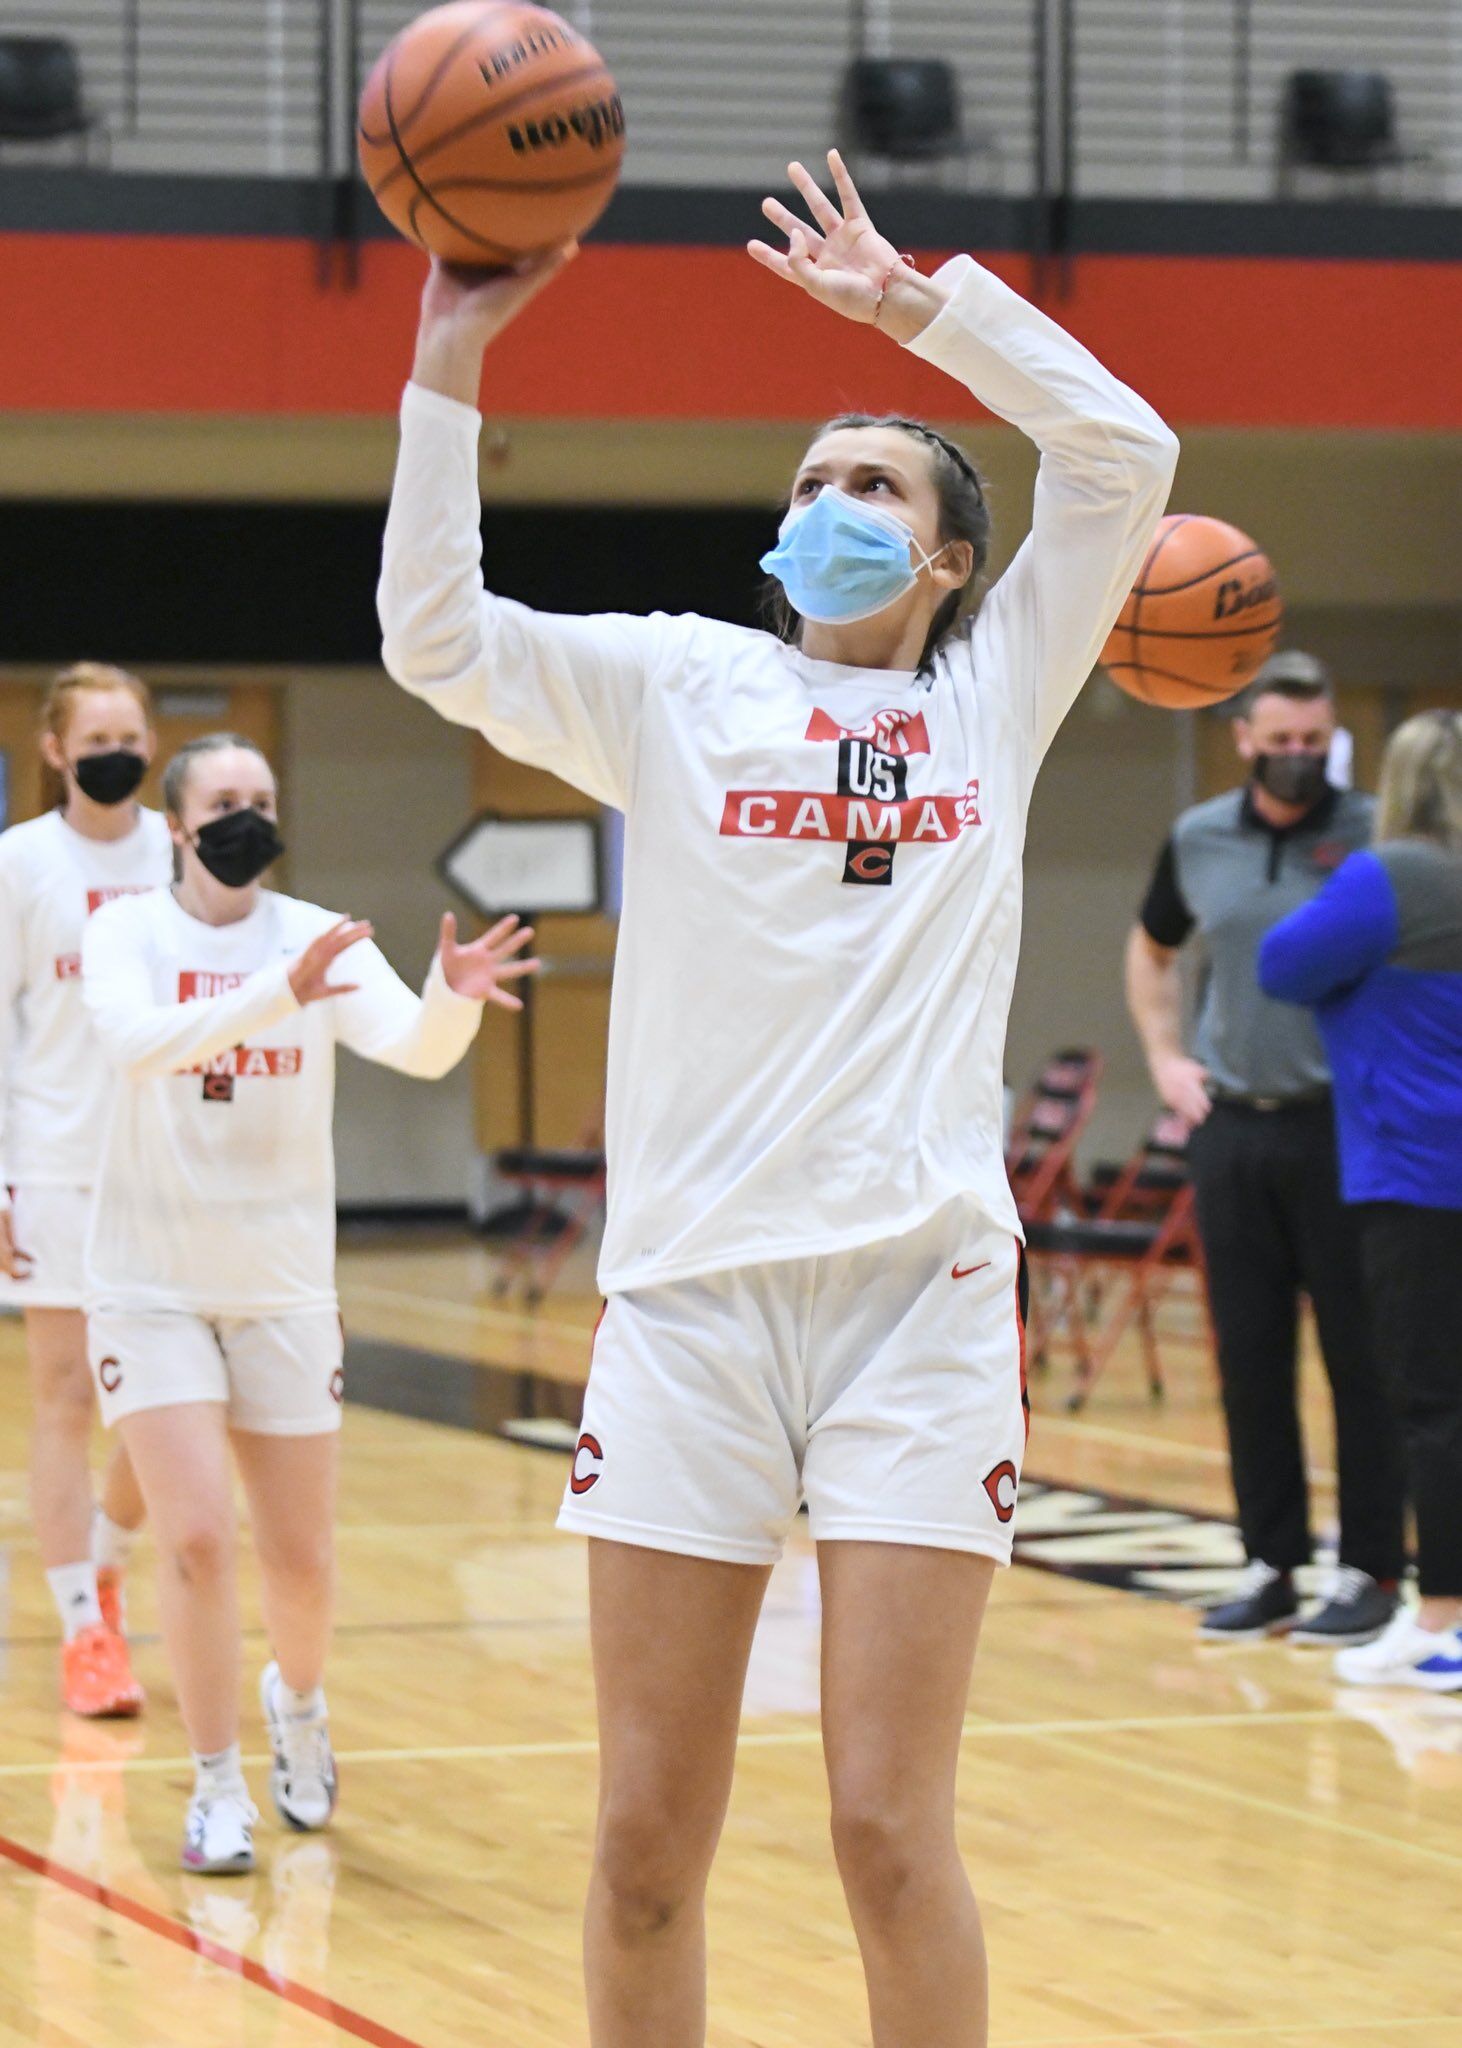 Reagan Jamison is one of five freshmen on the Camas girls basketball varsity team. The Papermakers are winning now and also have an eye on the future. Photo courtesy Kris Cavin